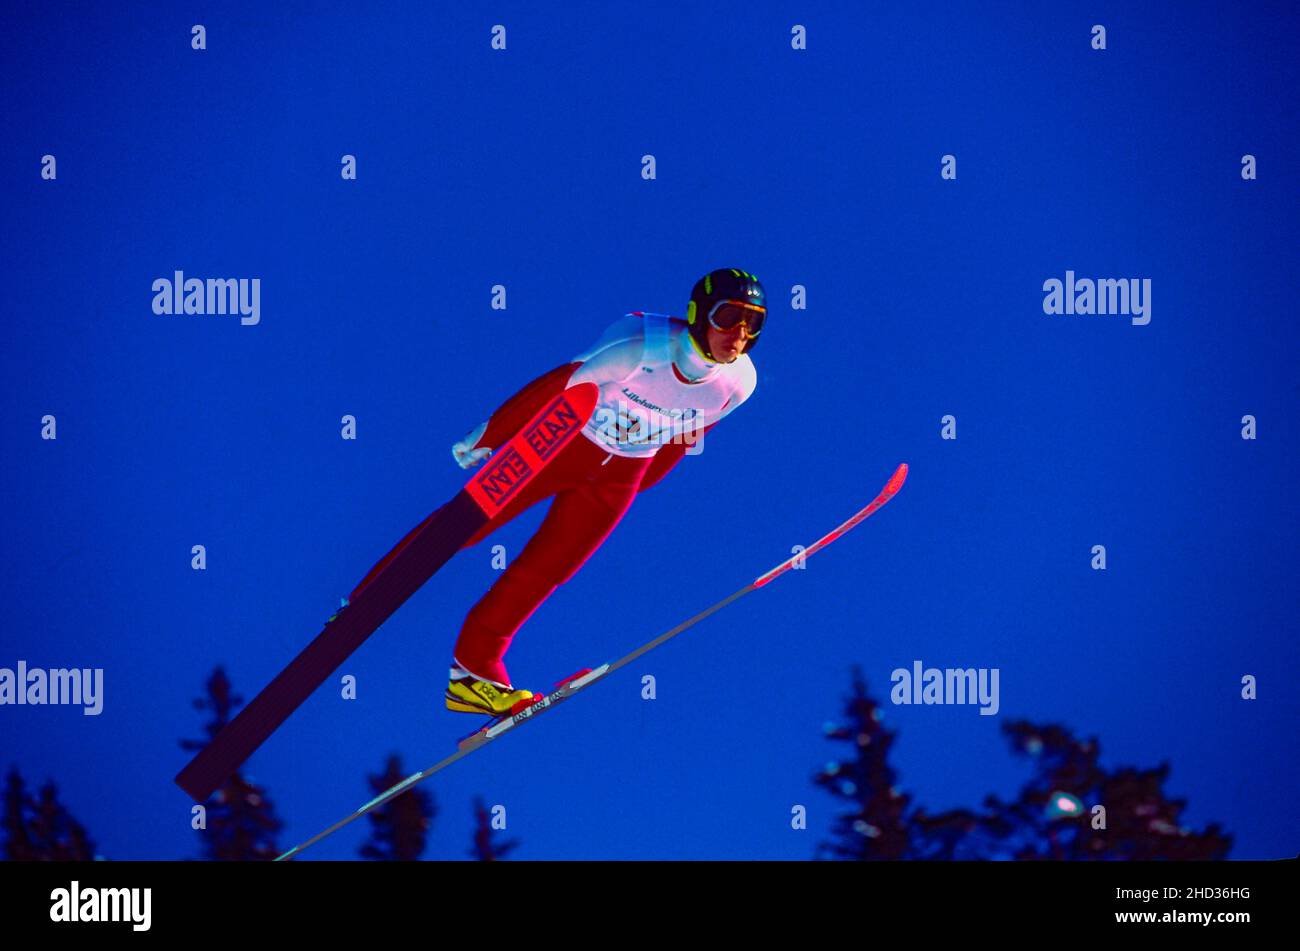 Aleksandr Sinyavsky (BLR) competing in the Men's K120 individual ski jumping at the 1994 Olympic Winter Games Stock Photo